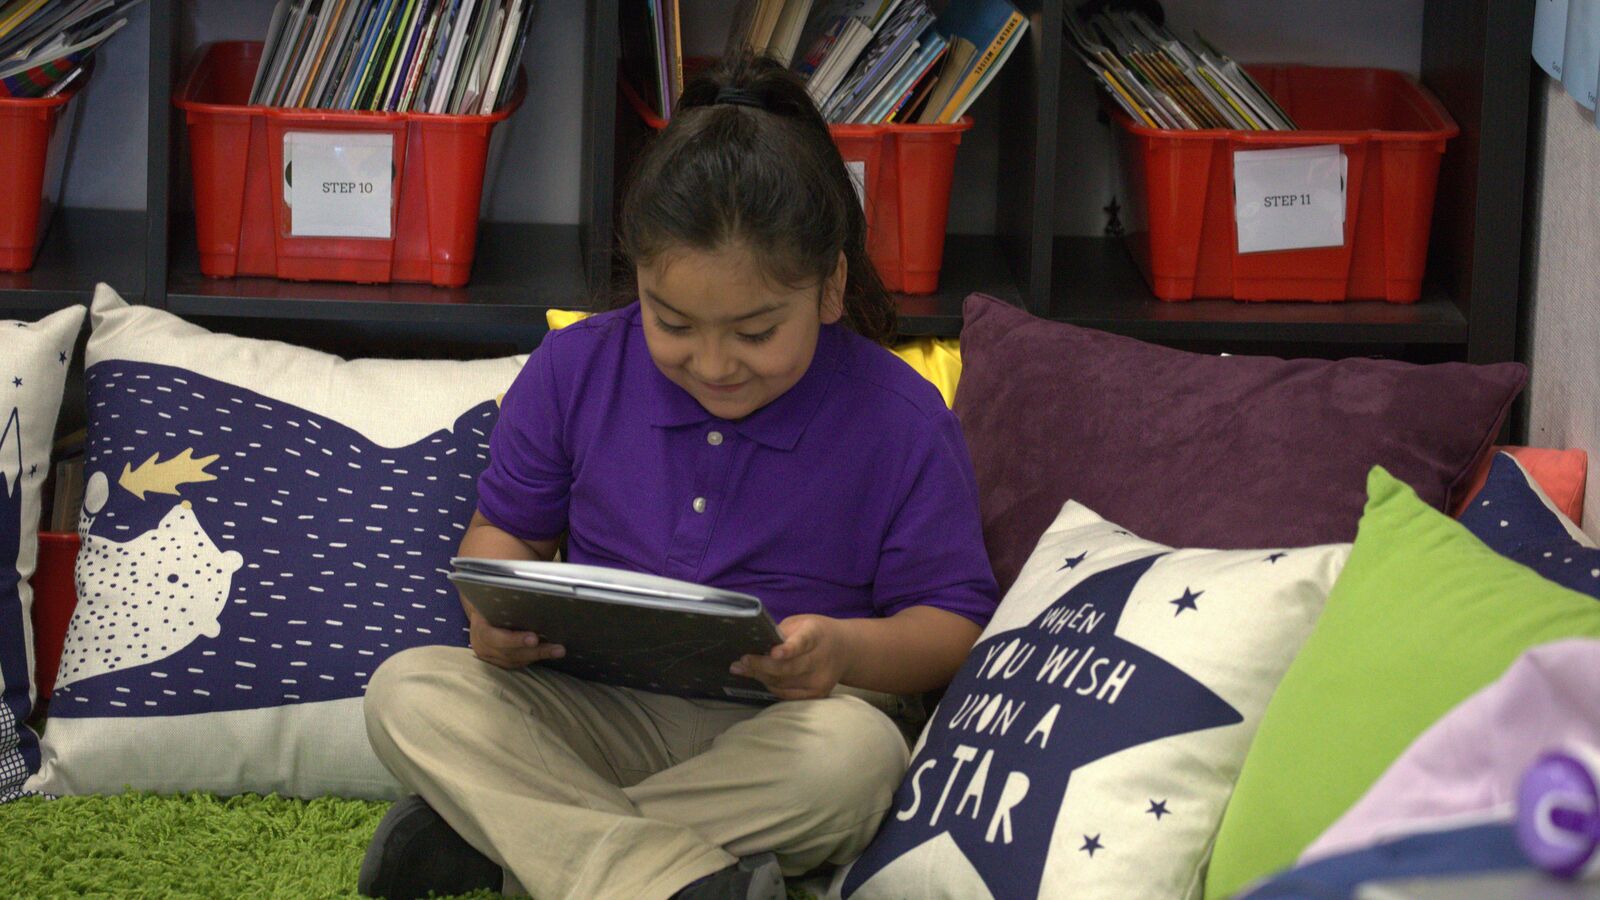 An elementary school student reads a book in class